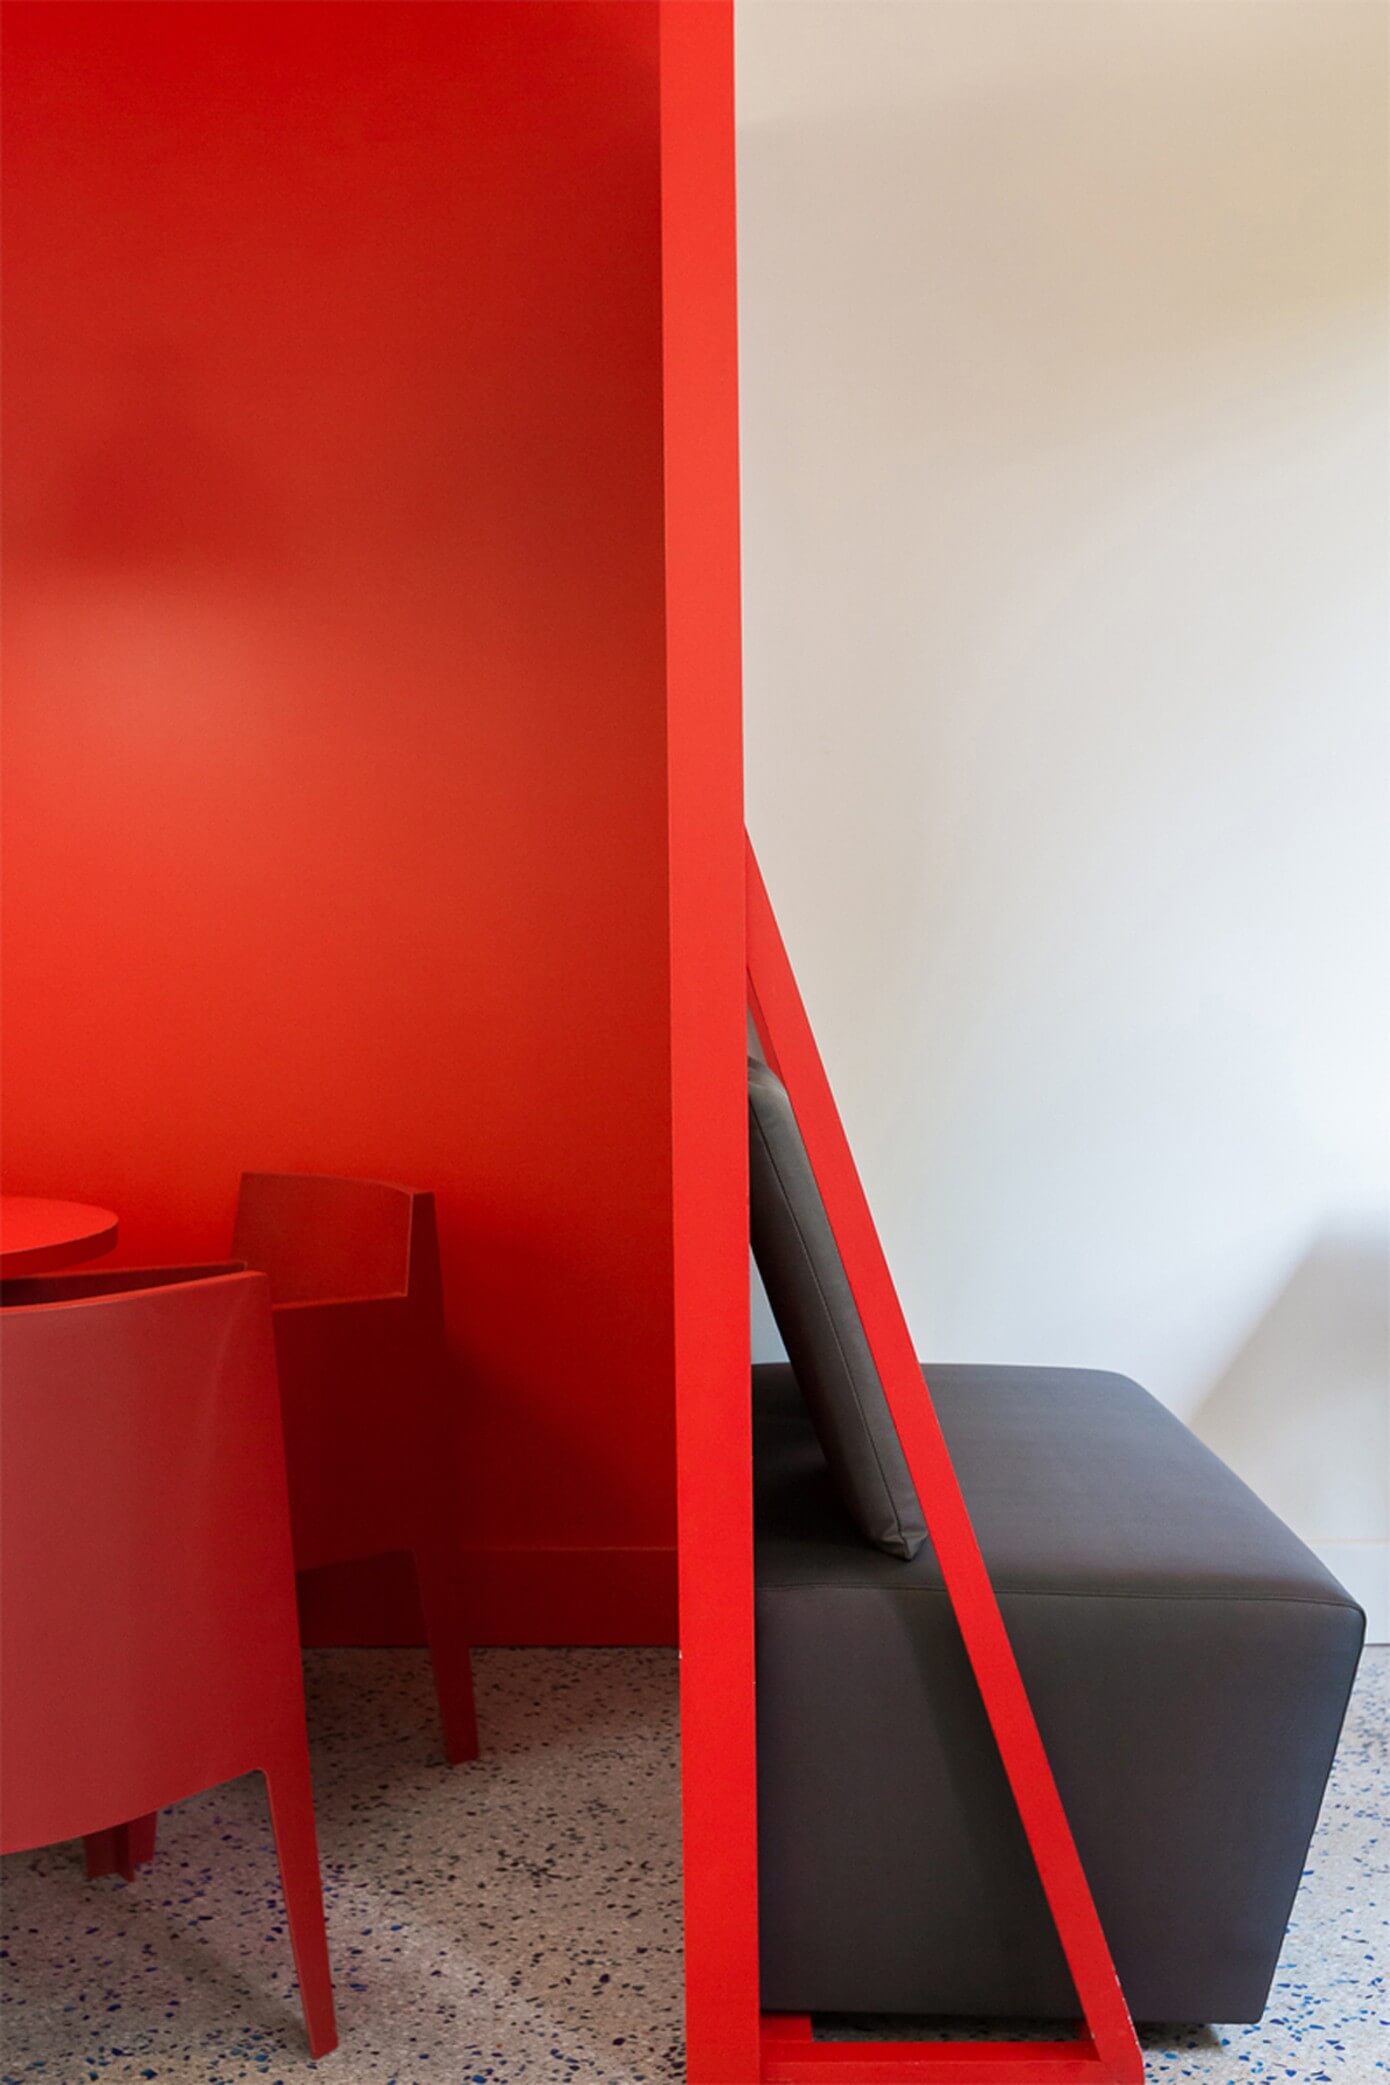 Ibis Styles Montreuil by Atelier Coste et Butin